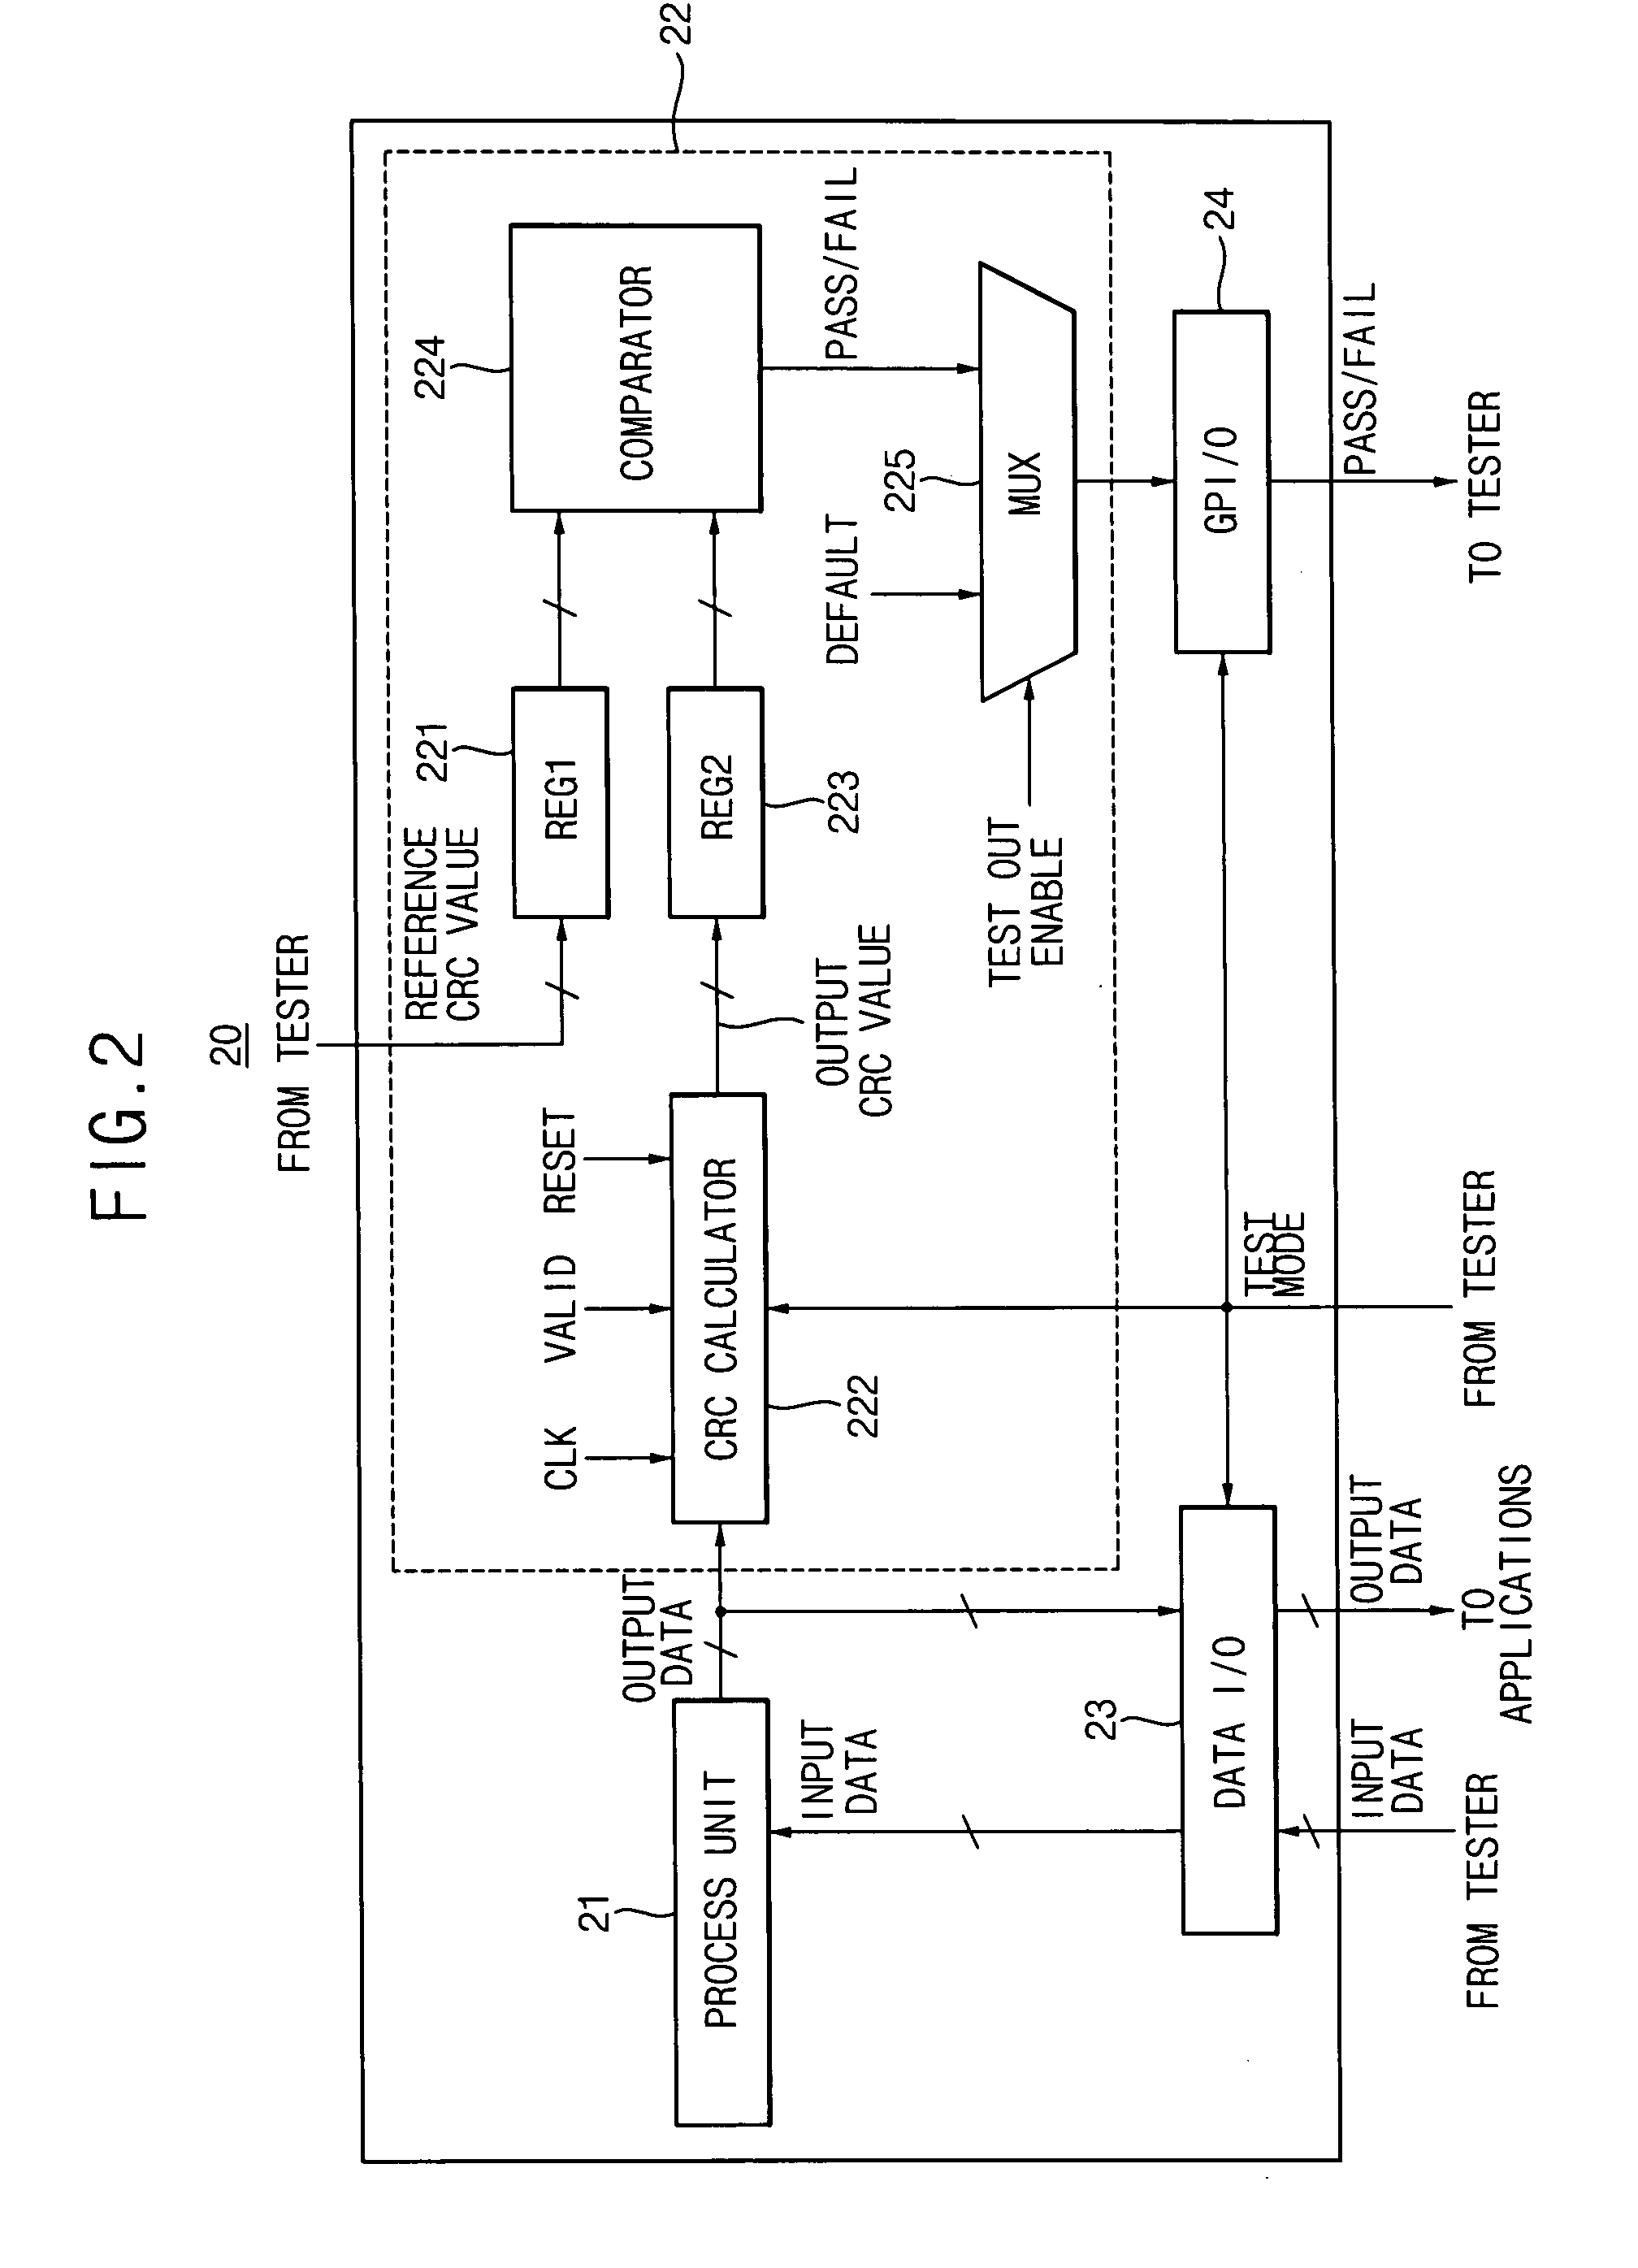 Digital apparatus and method of testing the same